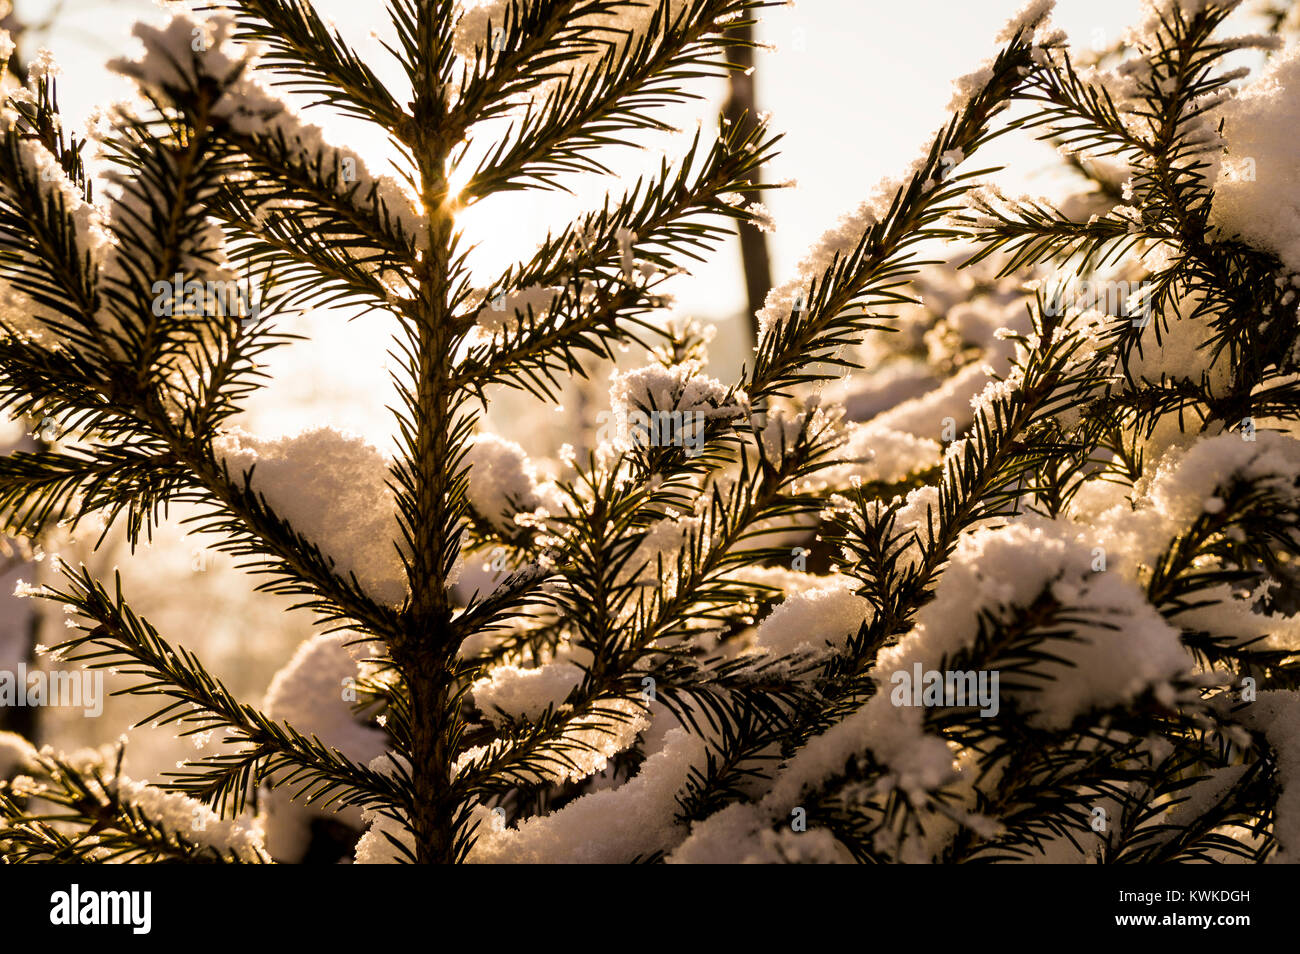 A fur-tree branch in the background of a forest covered with snow Stock Photo